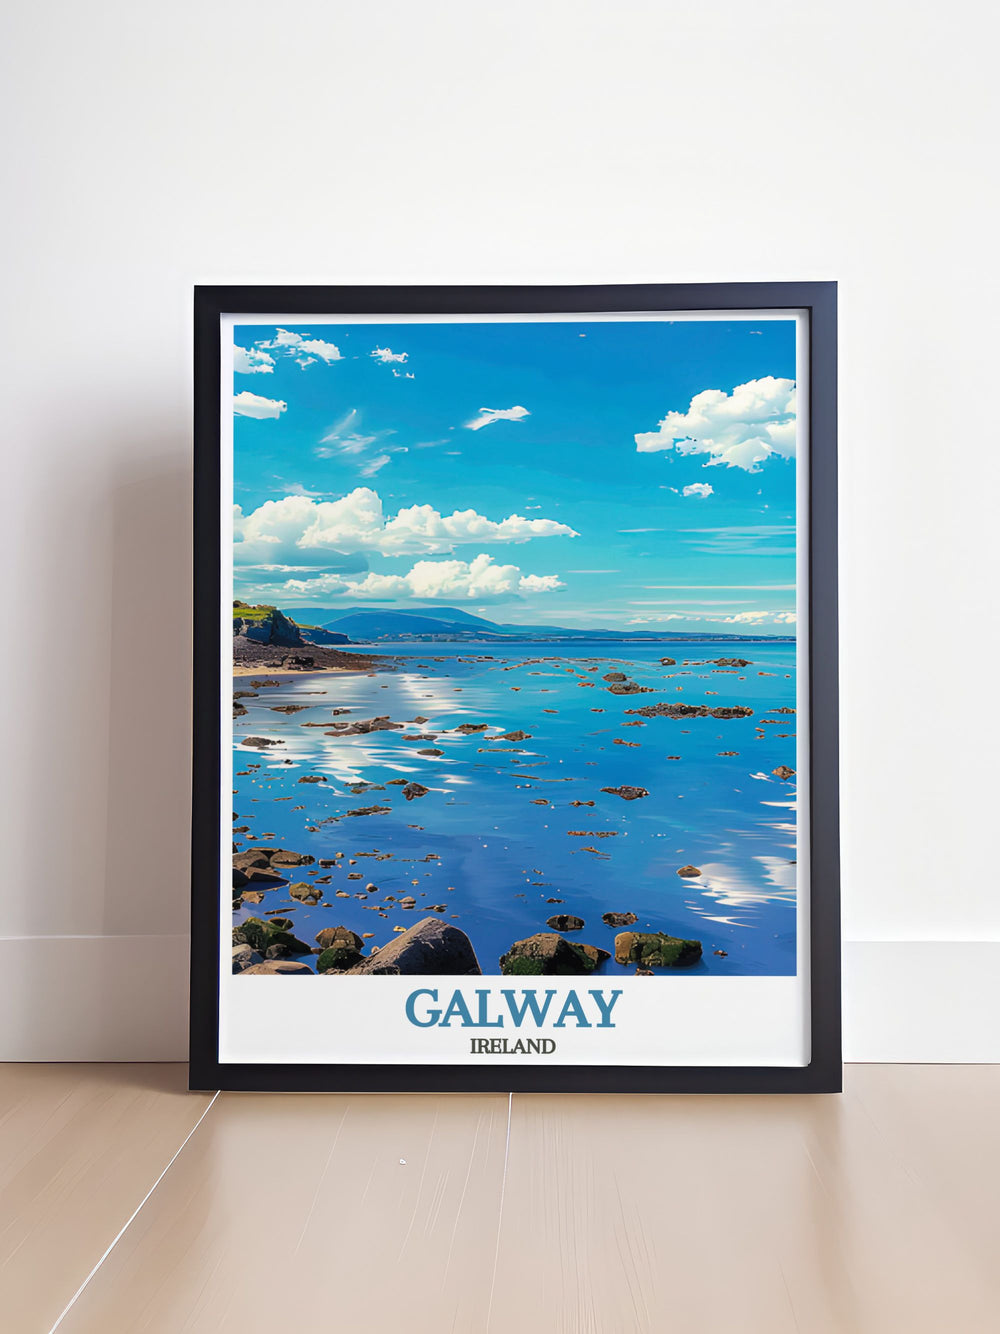 Highlighting the serene waters and stunning views of Galway Bay, this travel poster showcases the tranquil beauty of Irelands west coast. The scene includes peaceful shores and distant hills, ideal for those who appreciate the calming presence of natural landscapes.